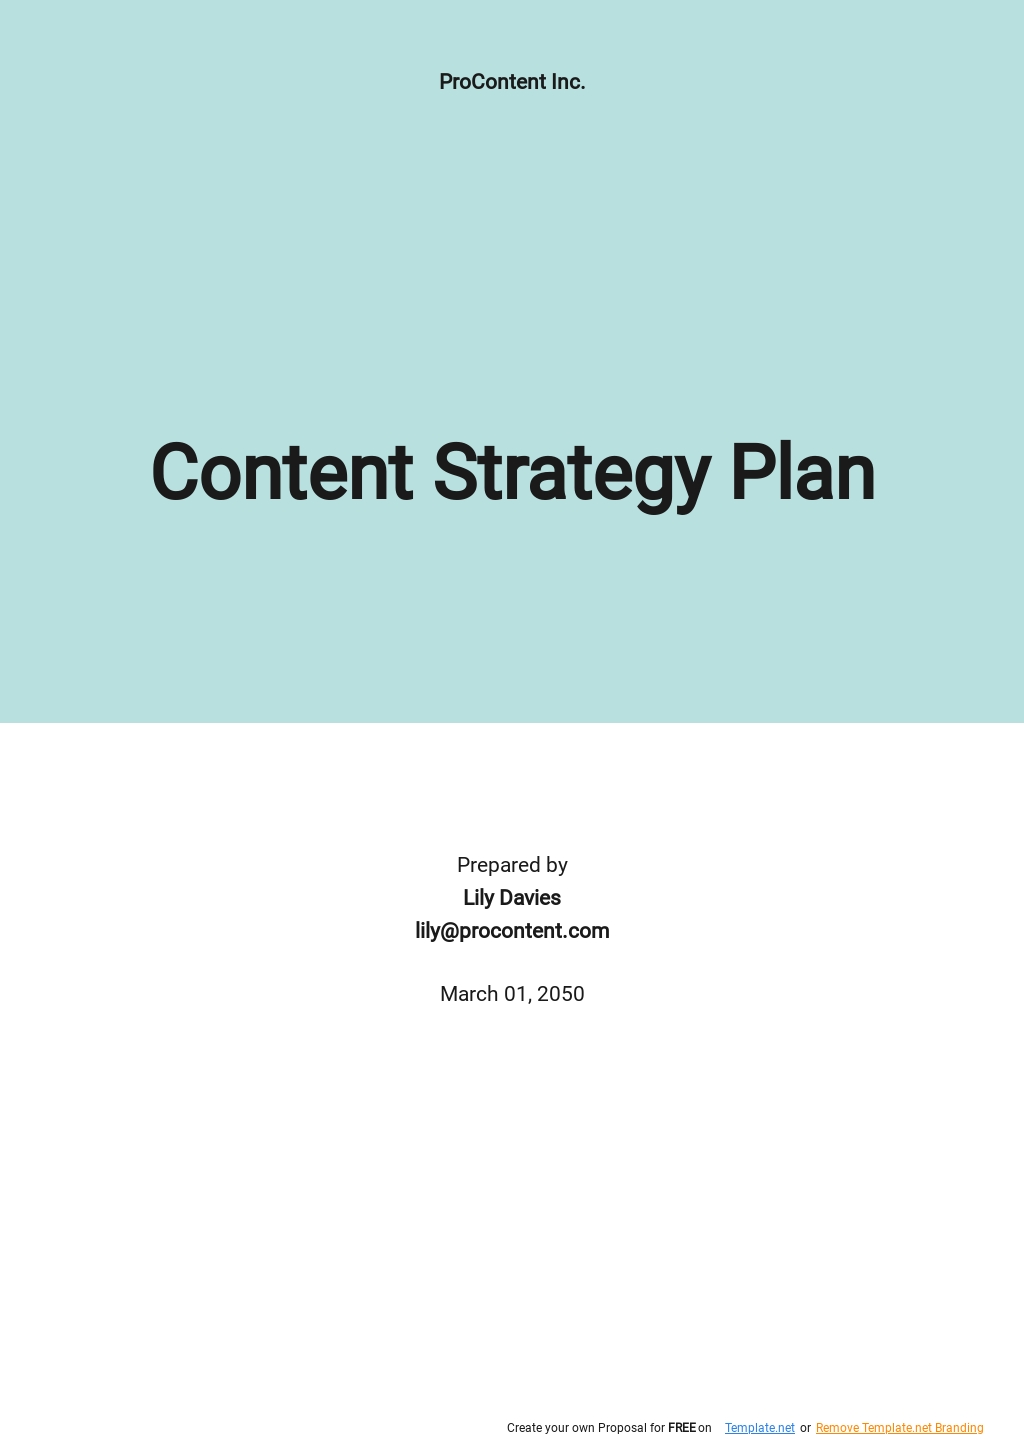 Sample Content Strategy Plan Template.jpe